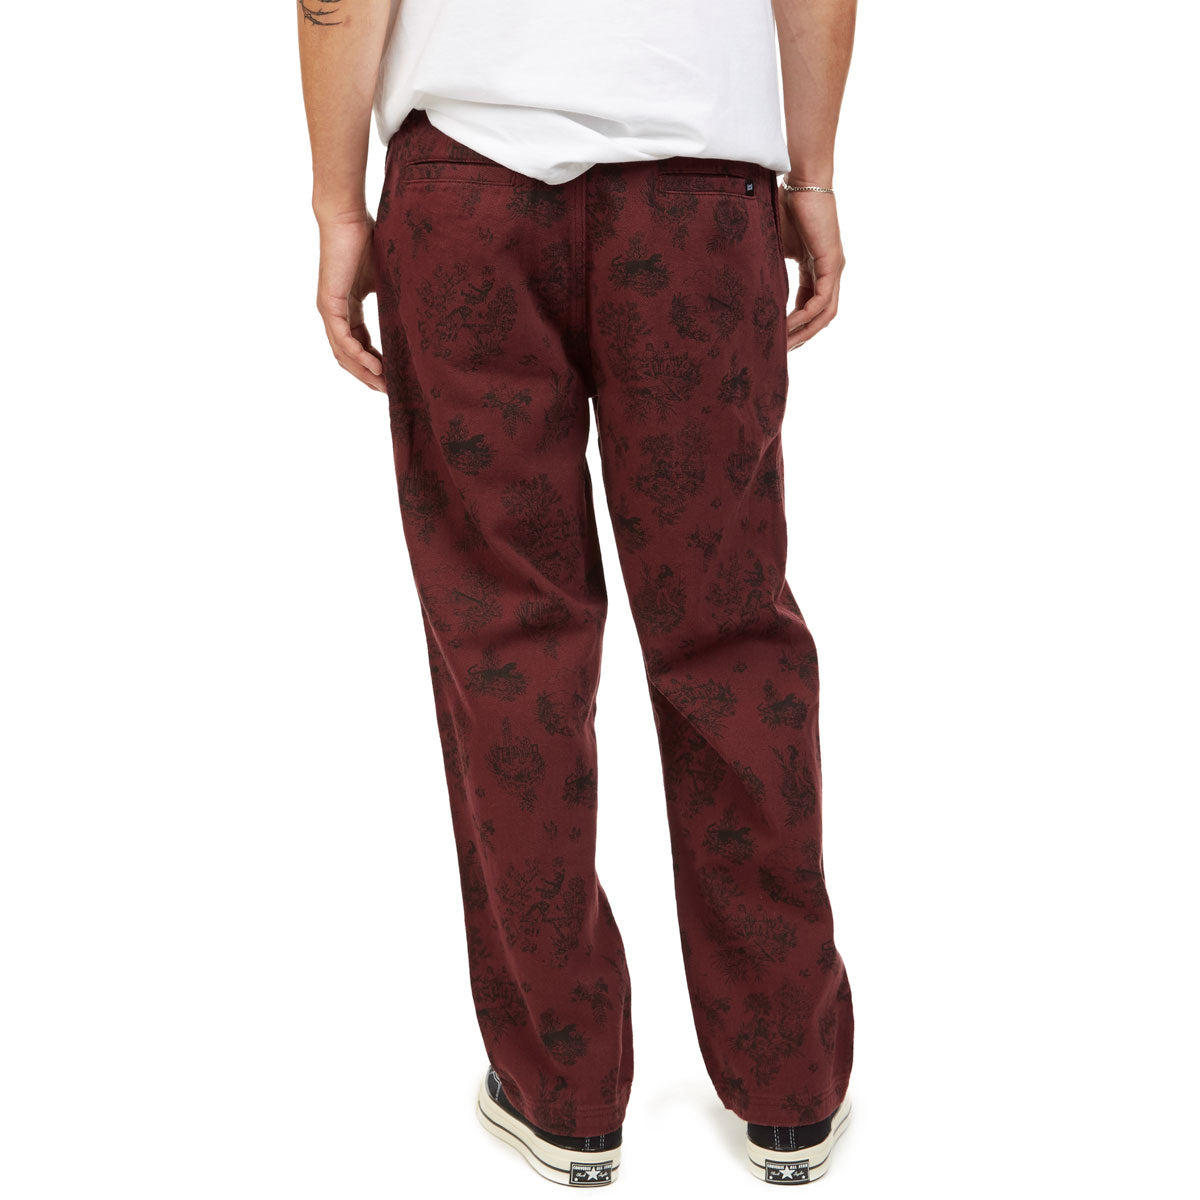 CCS Original Relaxed Toile Chino Pants - Oxblood image 4